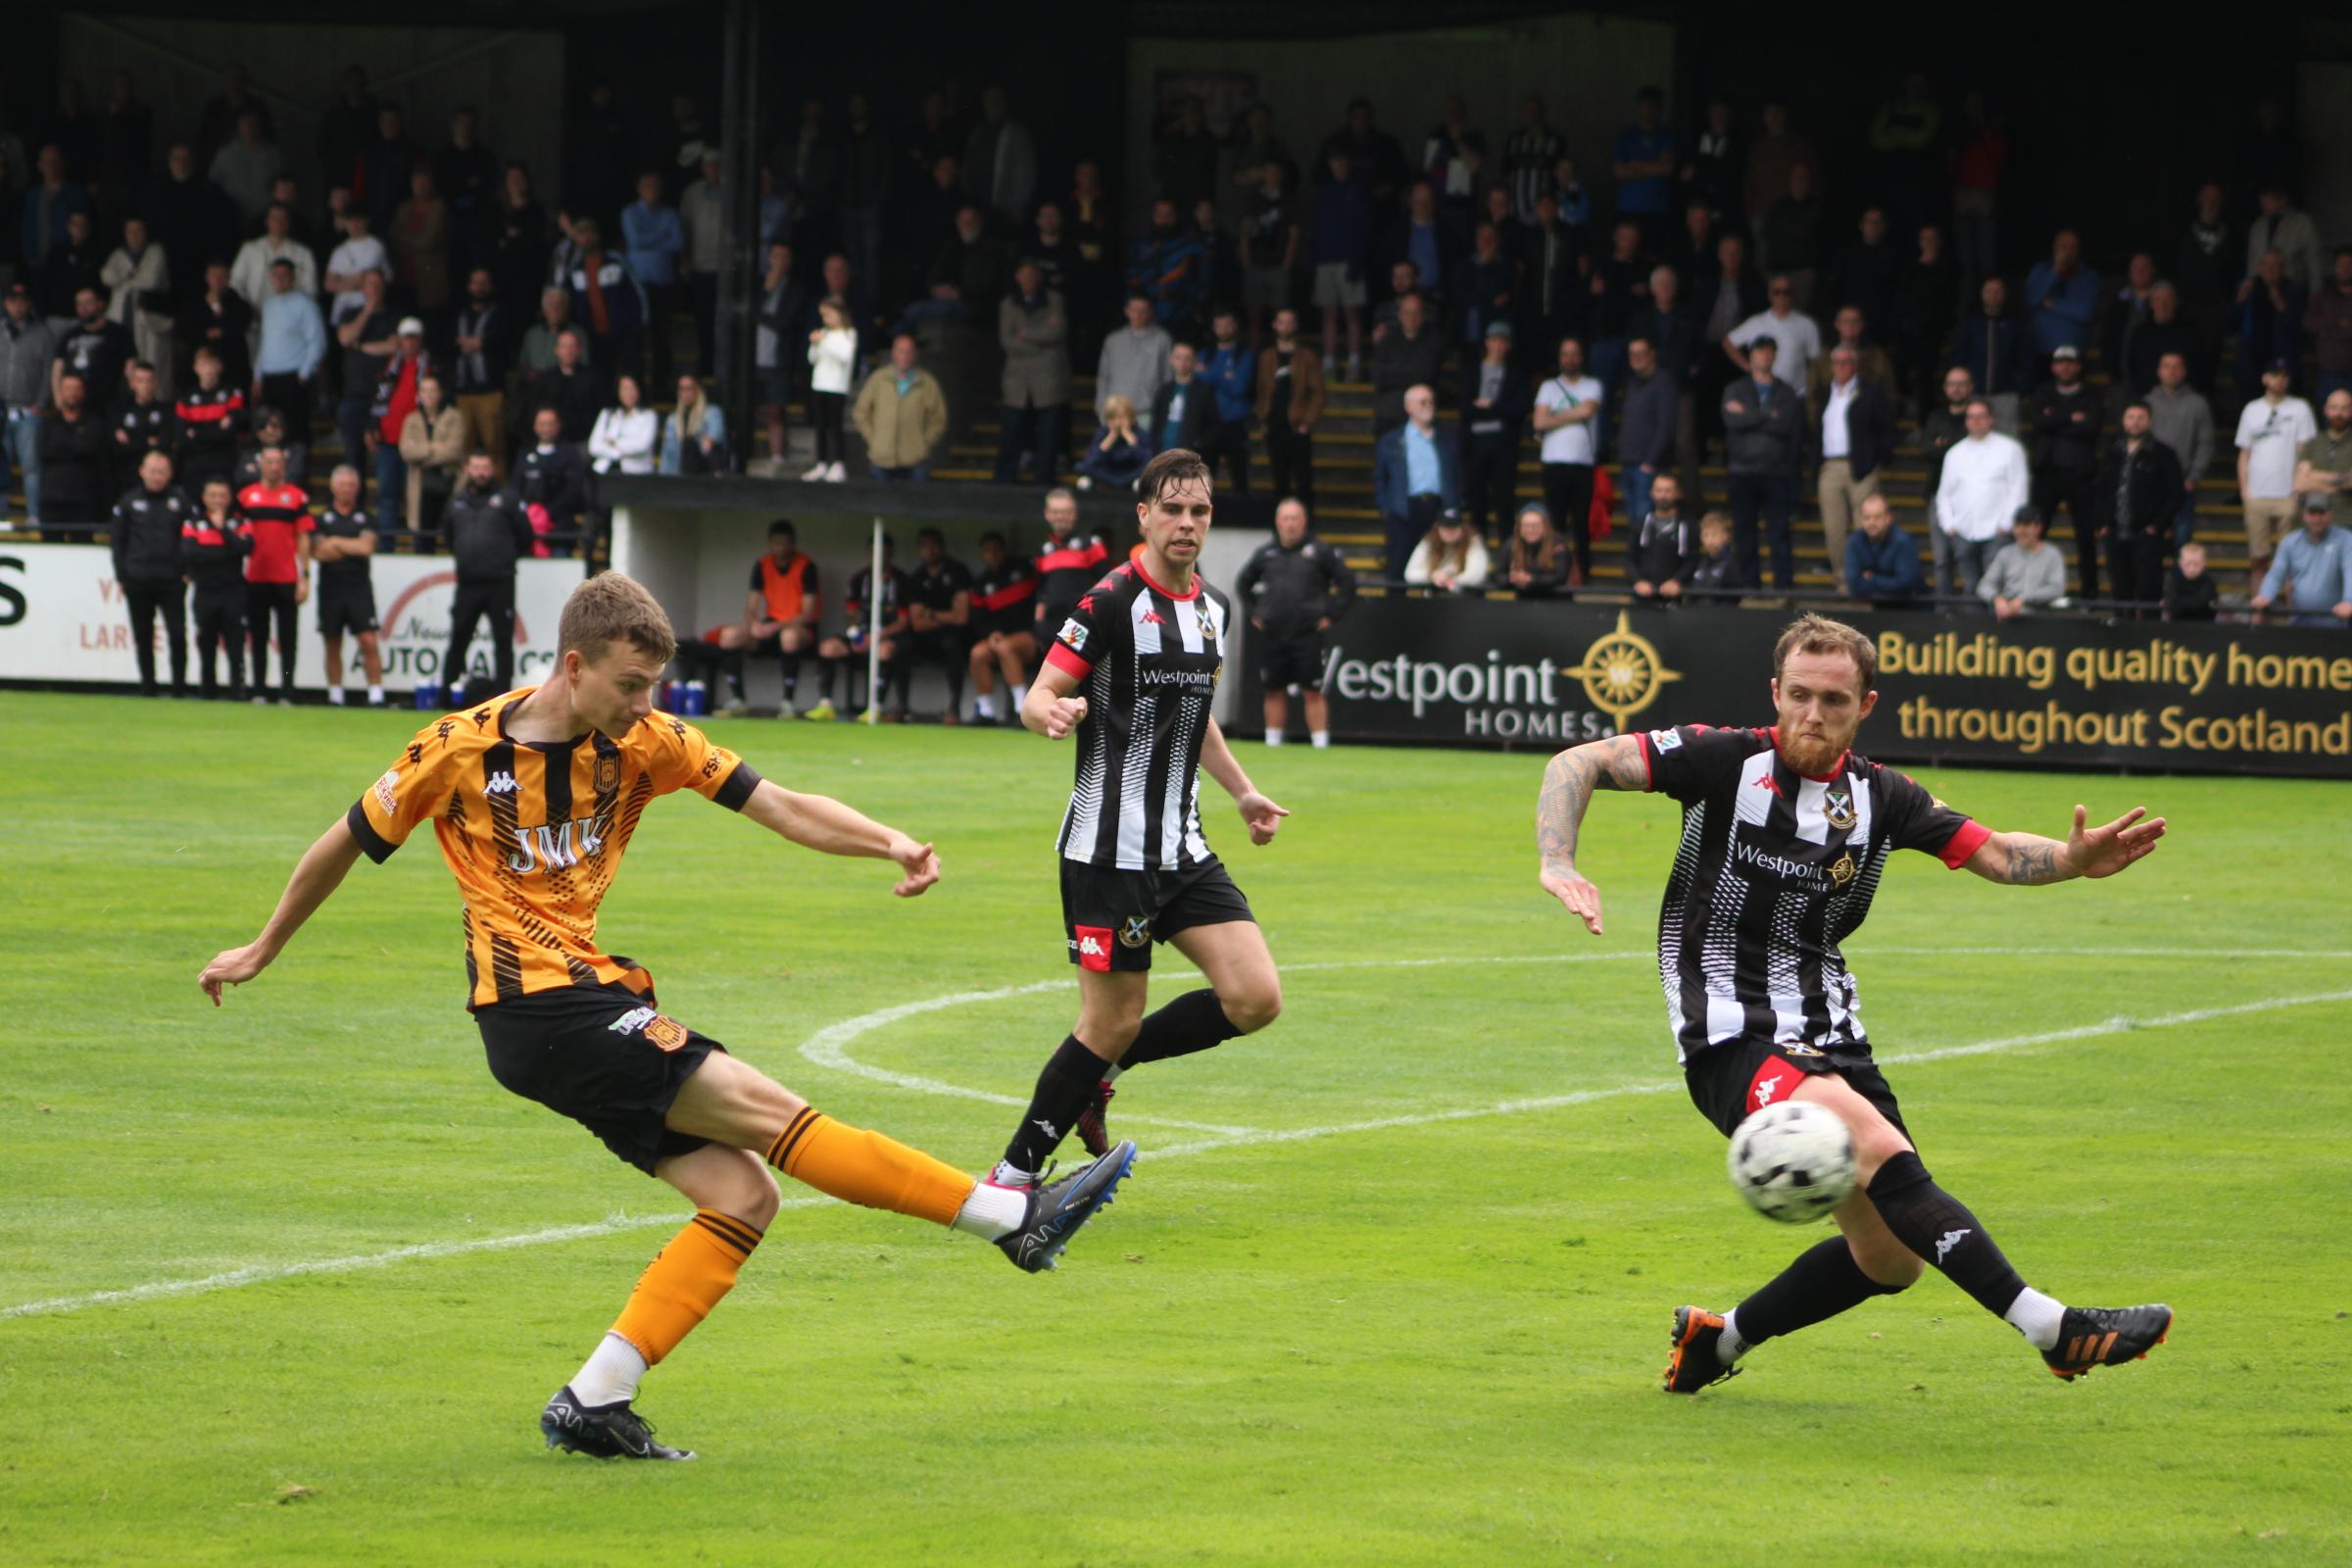 Auchinleck Talbot lost 1-0 to Pollok on the opening day of the WoSFL season on July 29